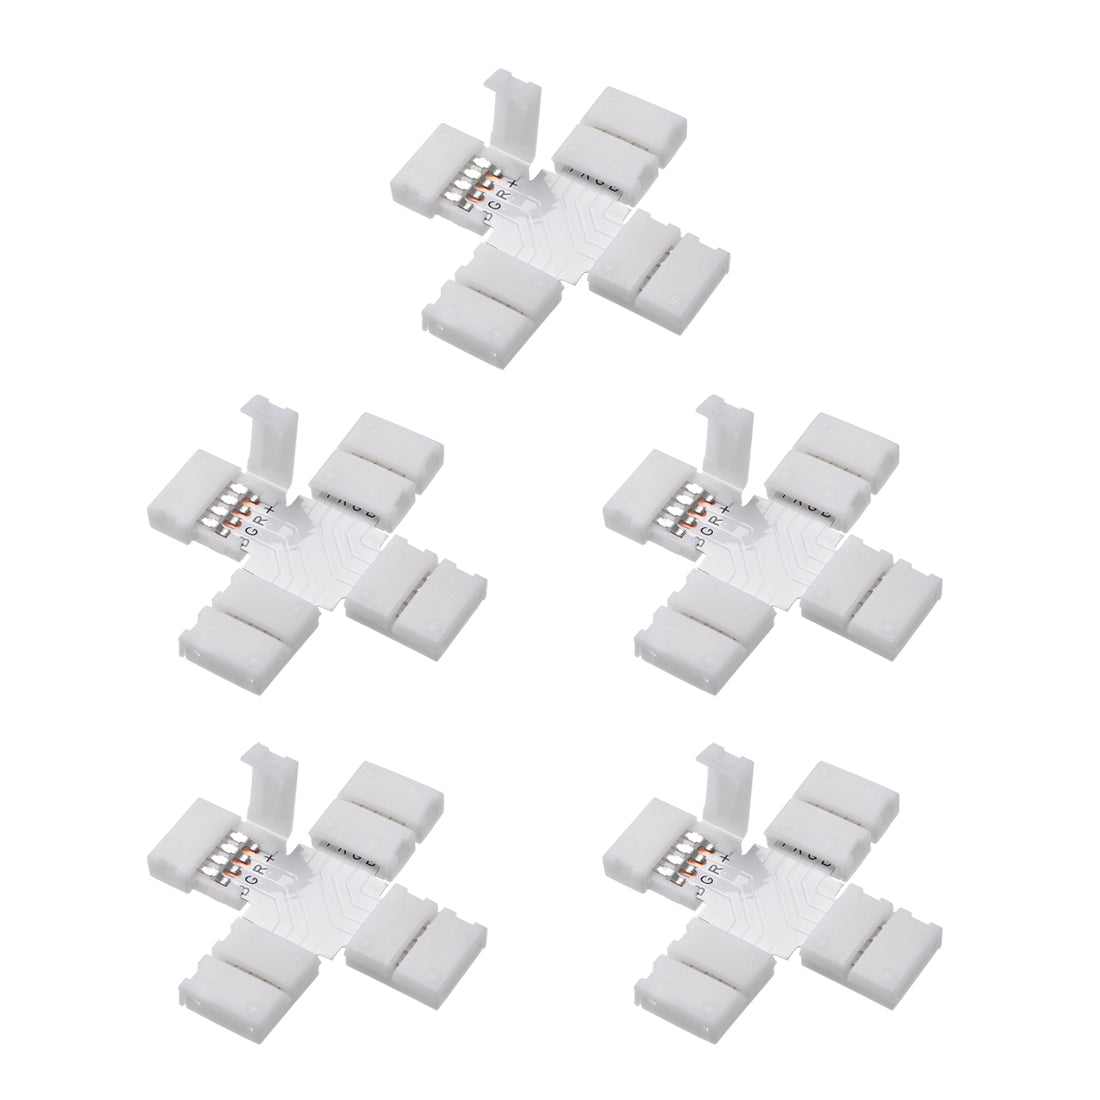 Uxcell Uxcell 10mm 4P Cross Shape LED Strip Connector Quick Splitter for 5050 RGB 4 Conductor Strip Lights 20Pcs